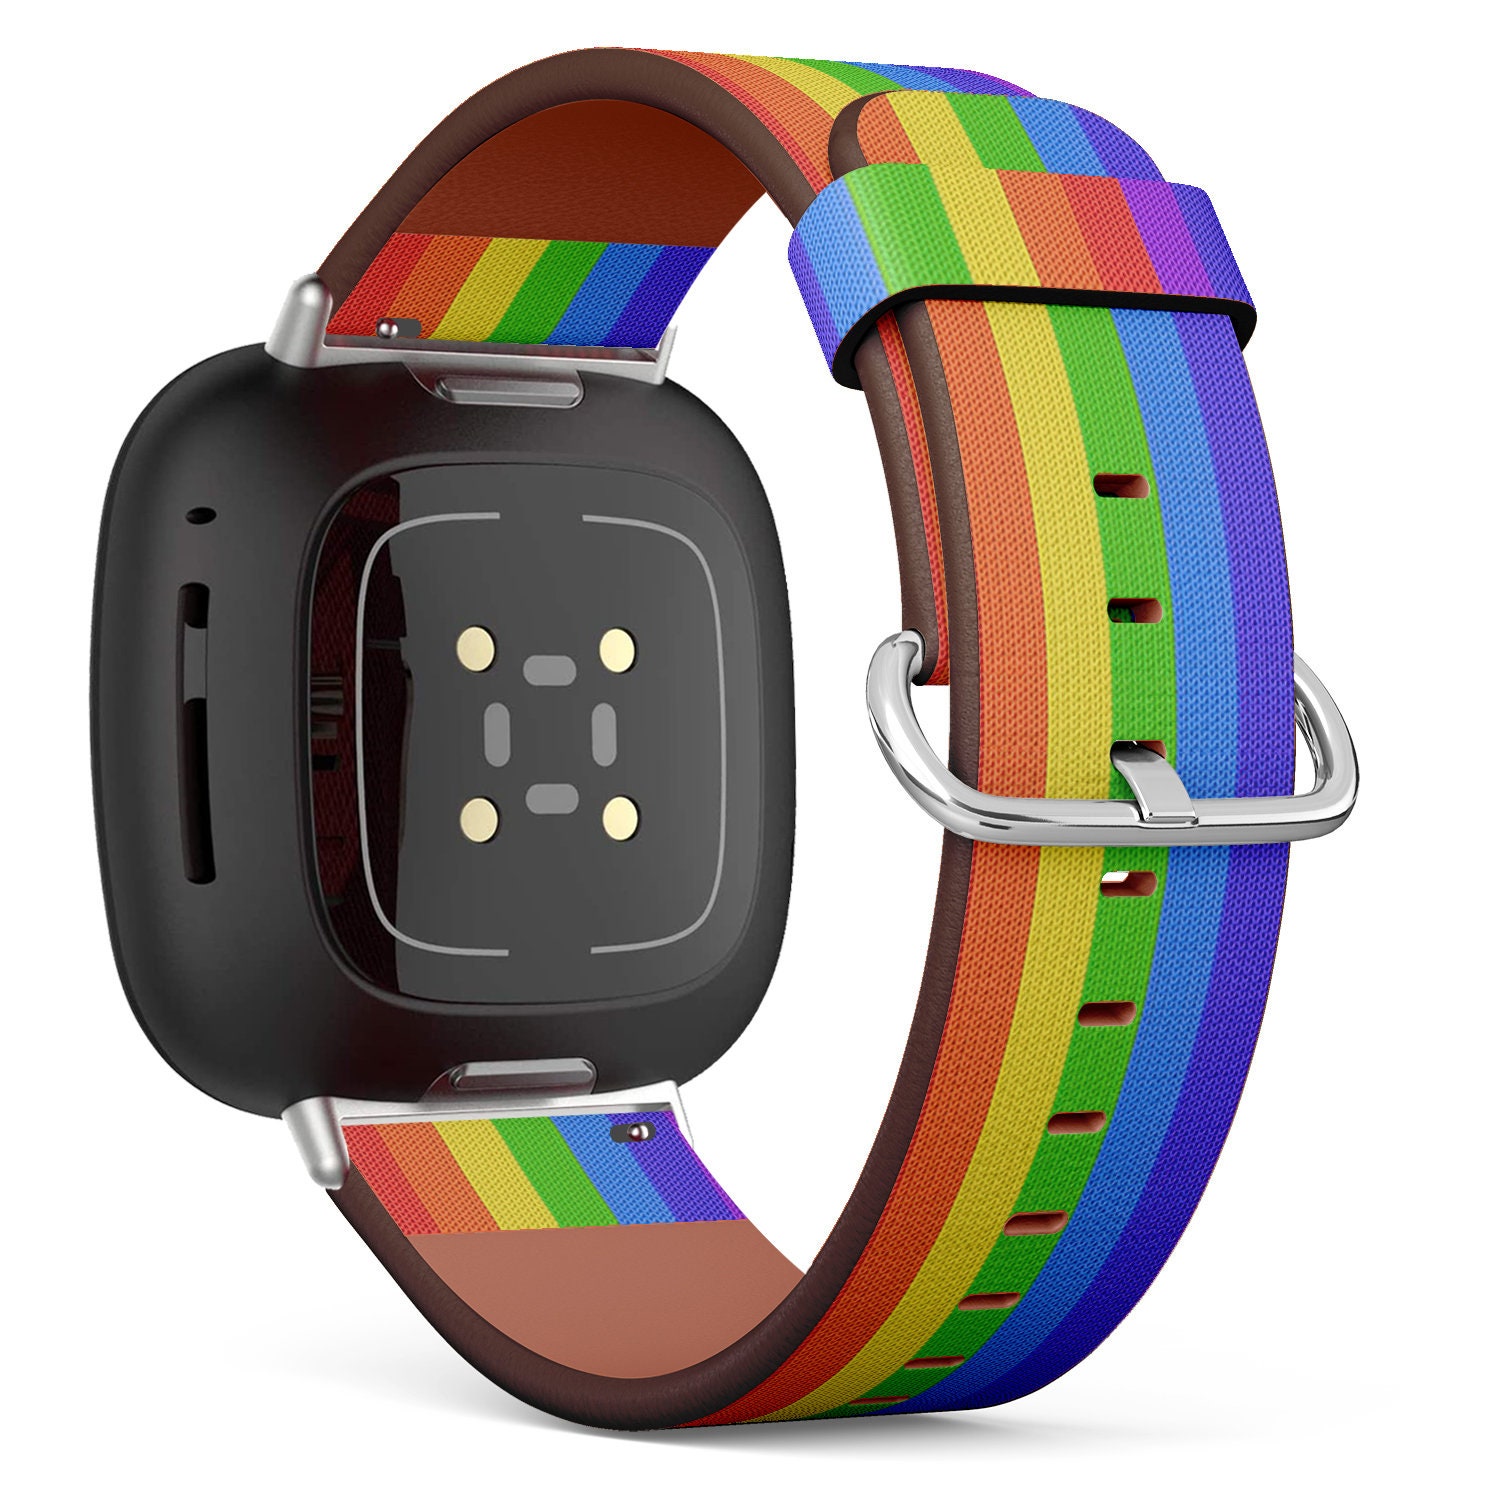 Fitbit Charge 4 3 Rainbow LBGT Pride Colorful Equality Scrunchies